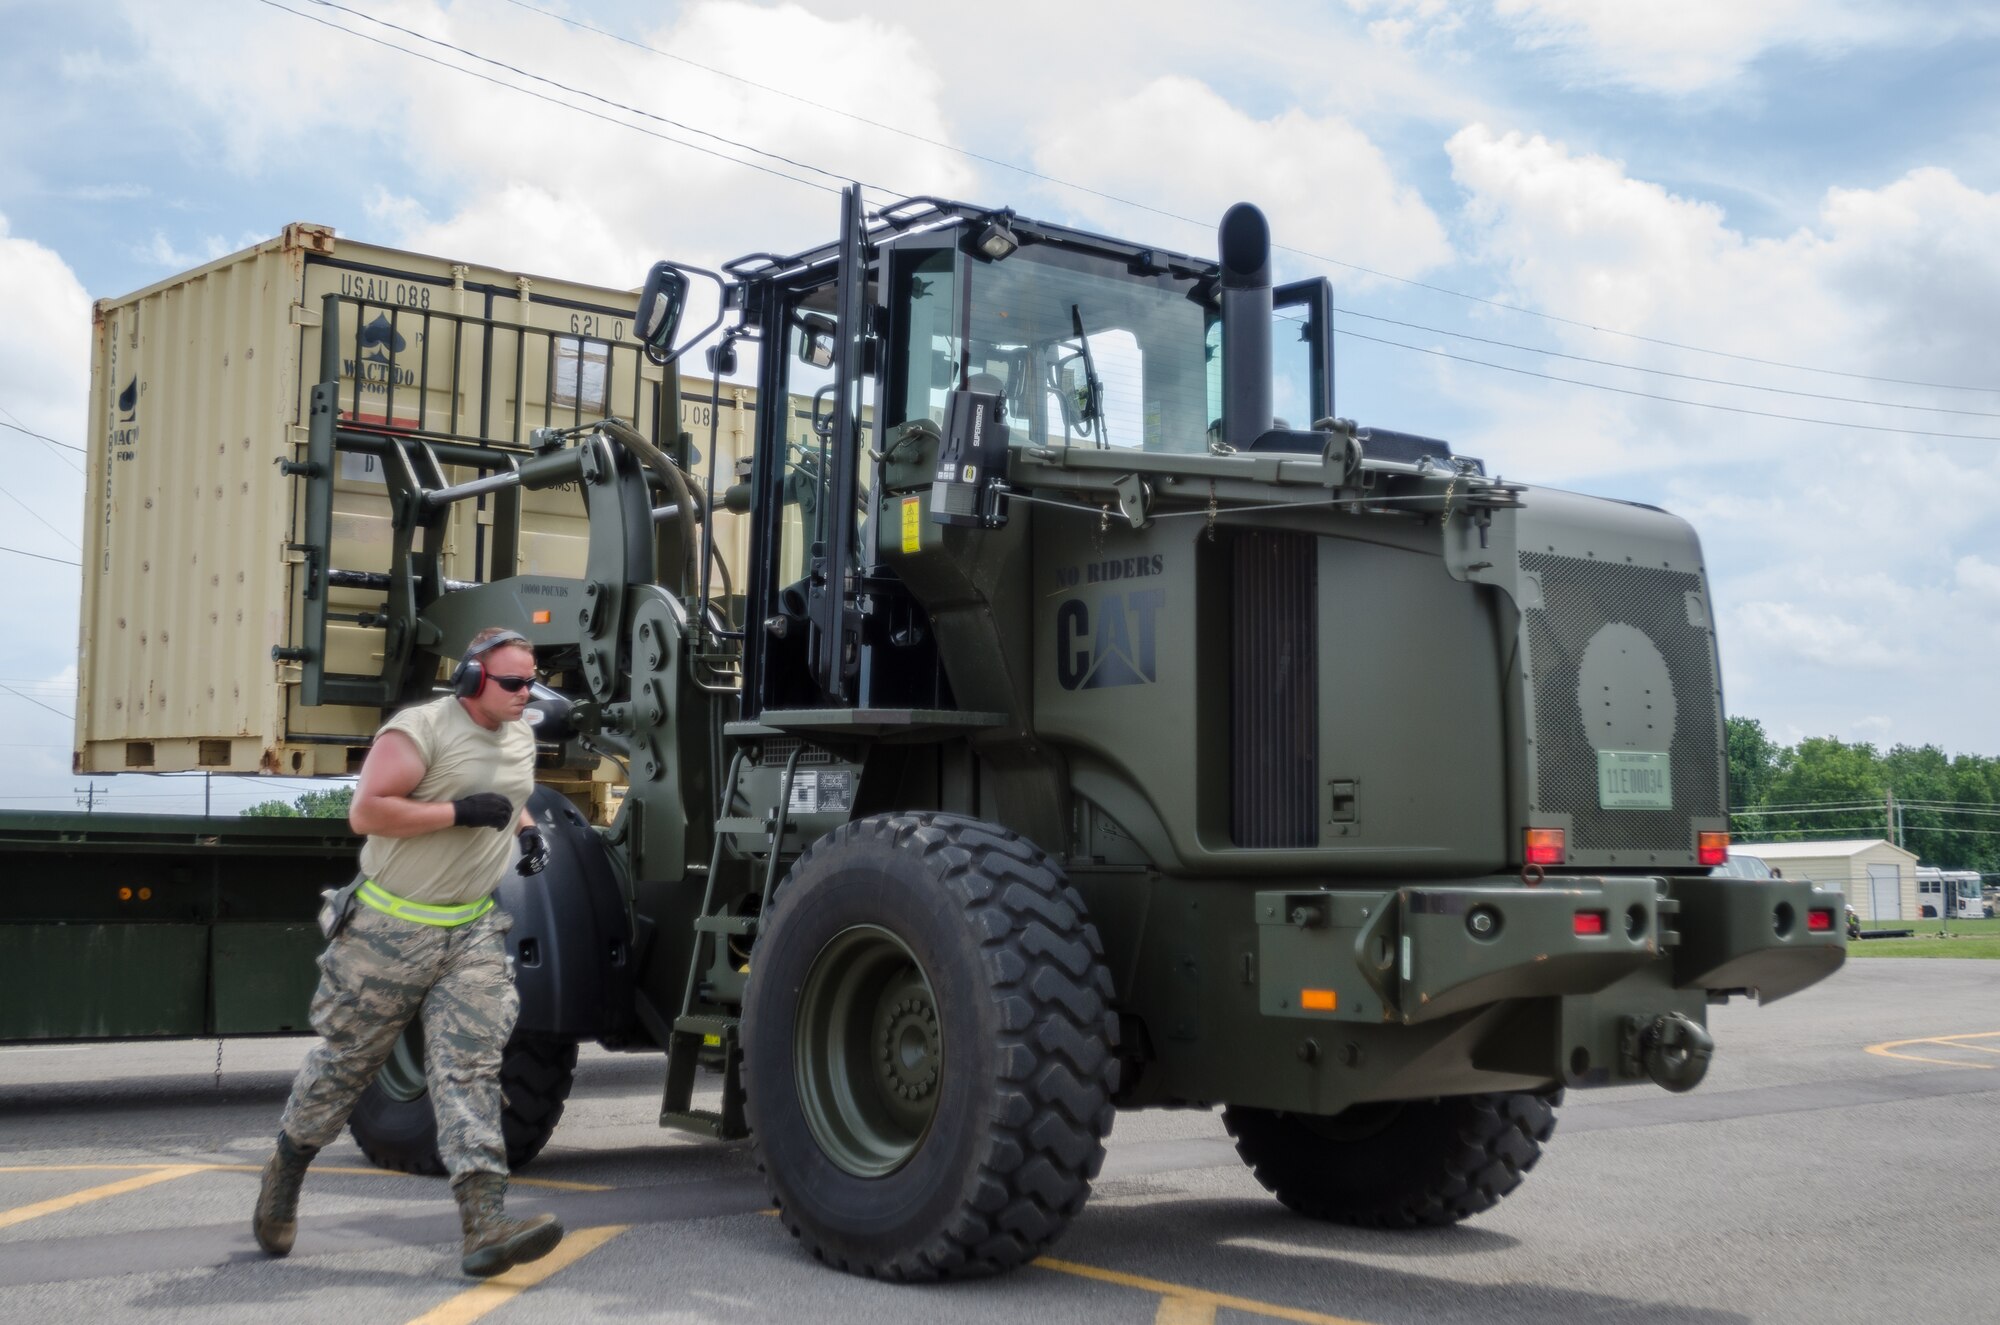 Airmen from the Kentucky Air National Guard’s 123rd Contingency Response Group use a forklift to load cargo onto a flatbed truck during Capstone '14, a homeland earthquake-response exercise at Fort Campbell, Ky., on June 18, 2014. The 123rd CRG joined forces with the U.S. Army’s 688th Rapid Port Opening Element to operate a Joint Task Force-Port Opening here from June 16 to 19, 2014. (U.S. Air National Guard photo by Master Sgt. Phil Speck)